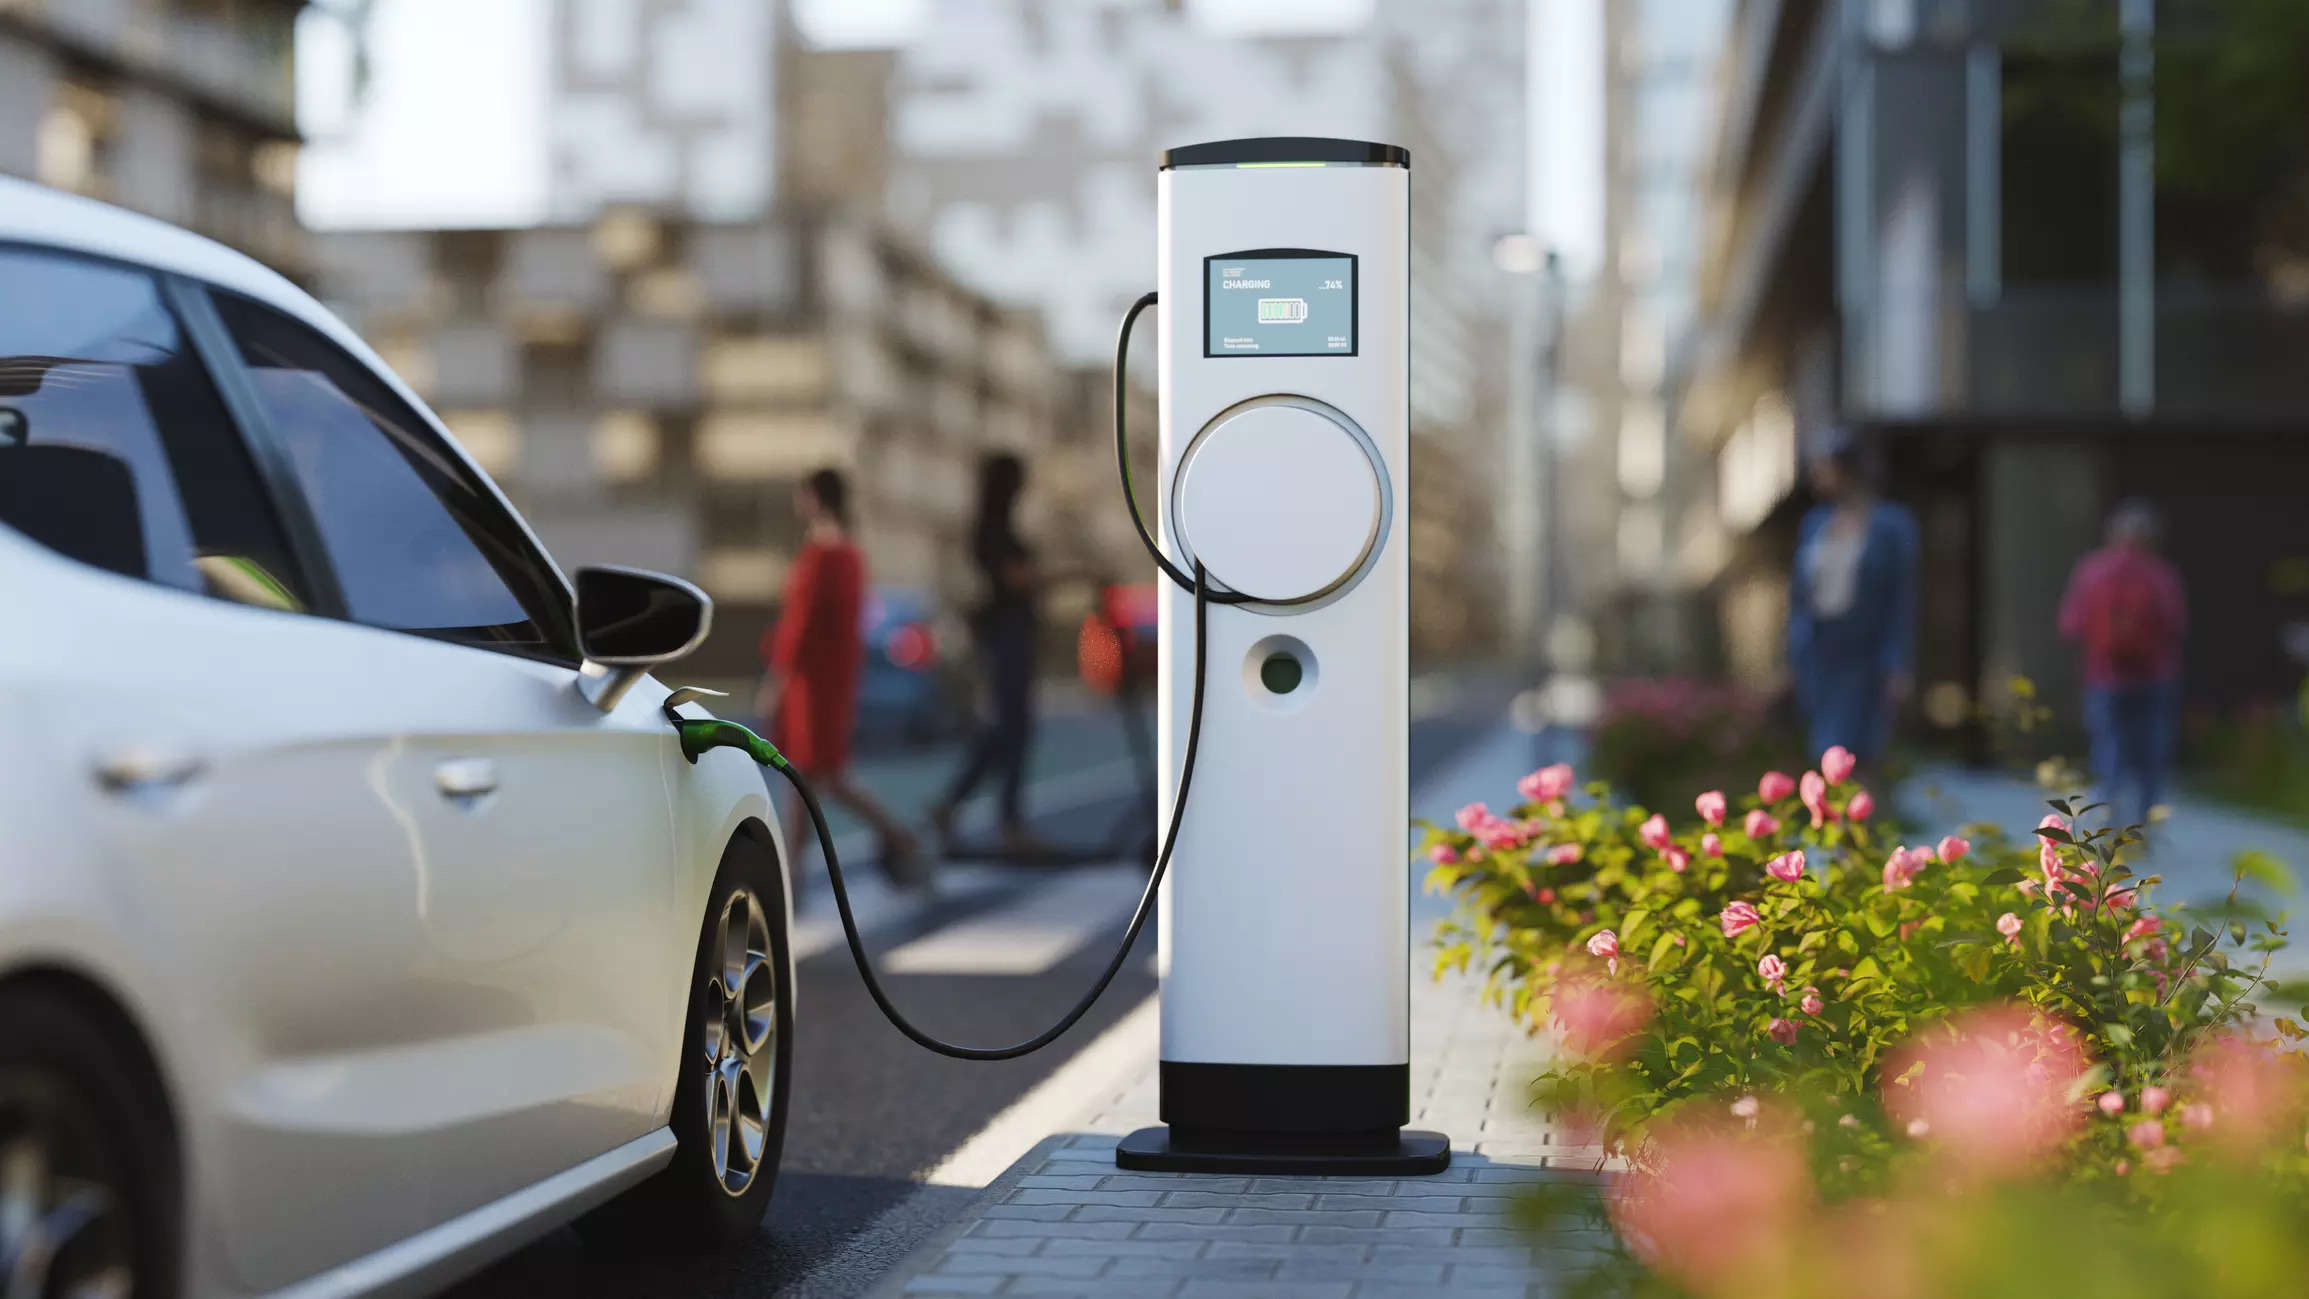 India and China have highest share of market for EV charging